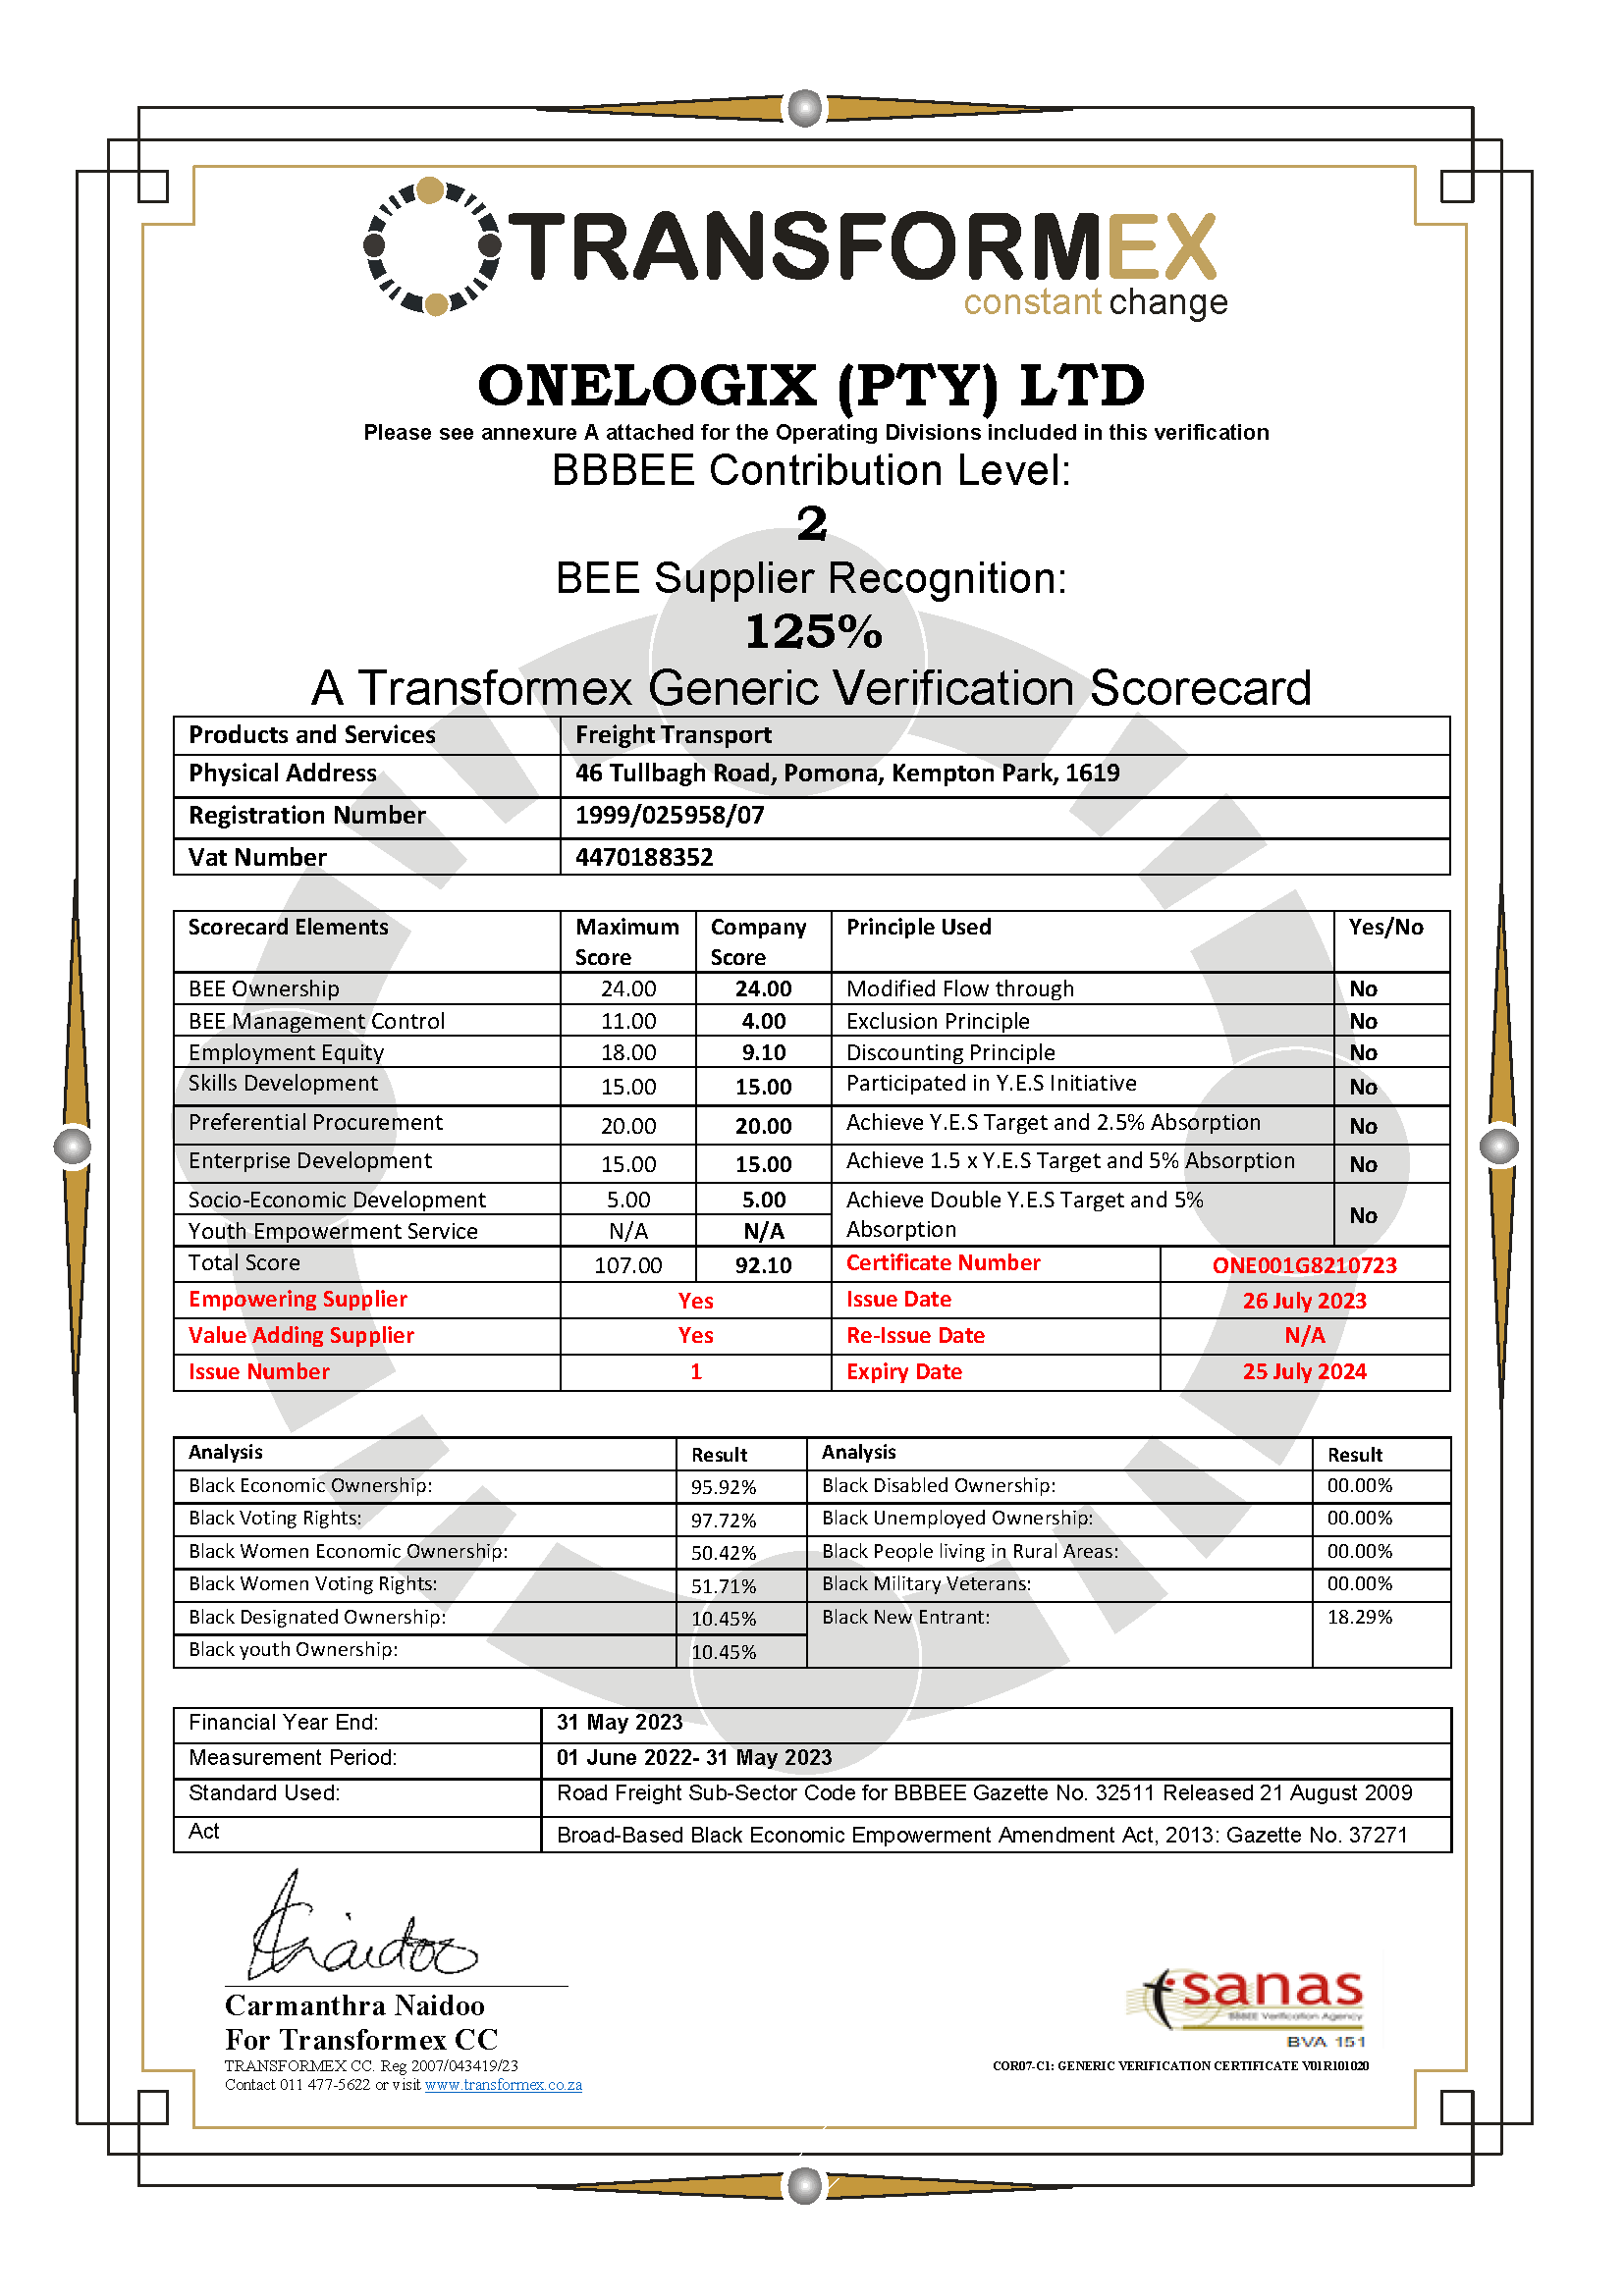 Onelogix (Pty) Ltd including subsidiaries